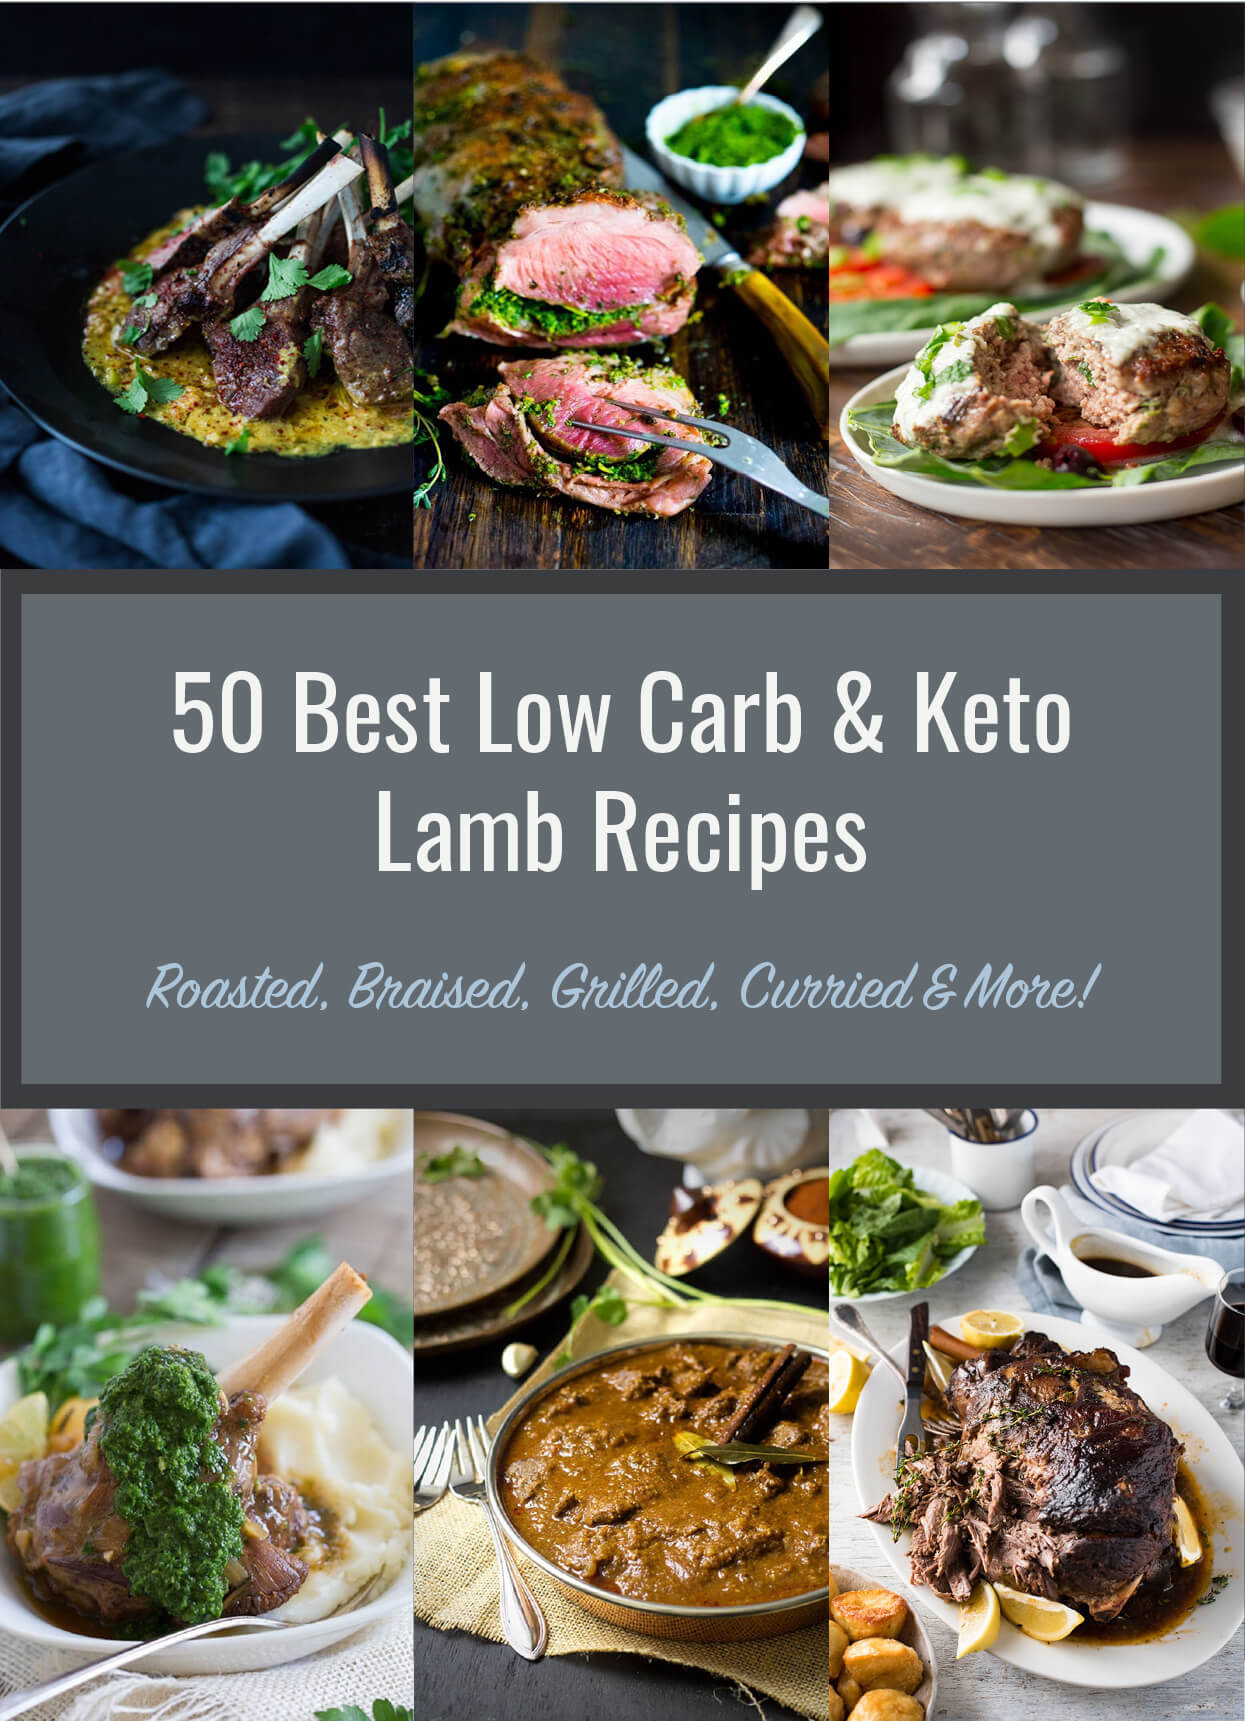 Low Carb Keto Recipes Lunch
 50 Best Low Carb & Keto Lamb Recipes